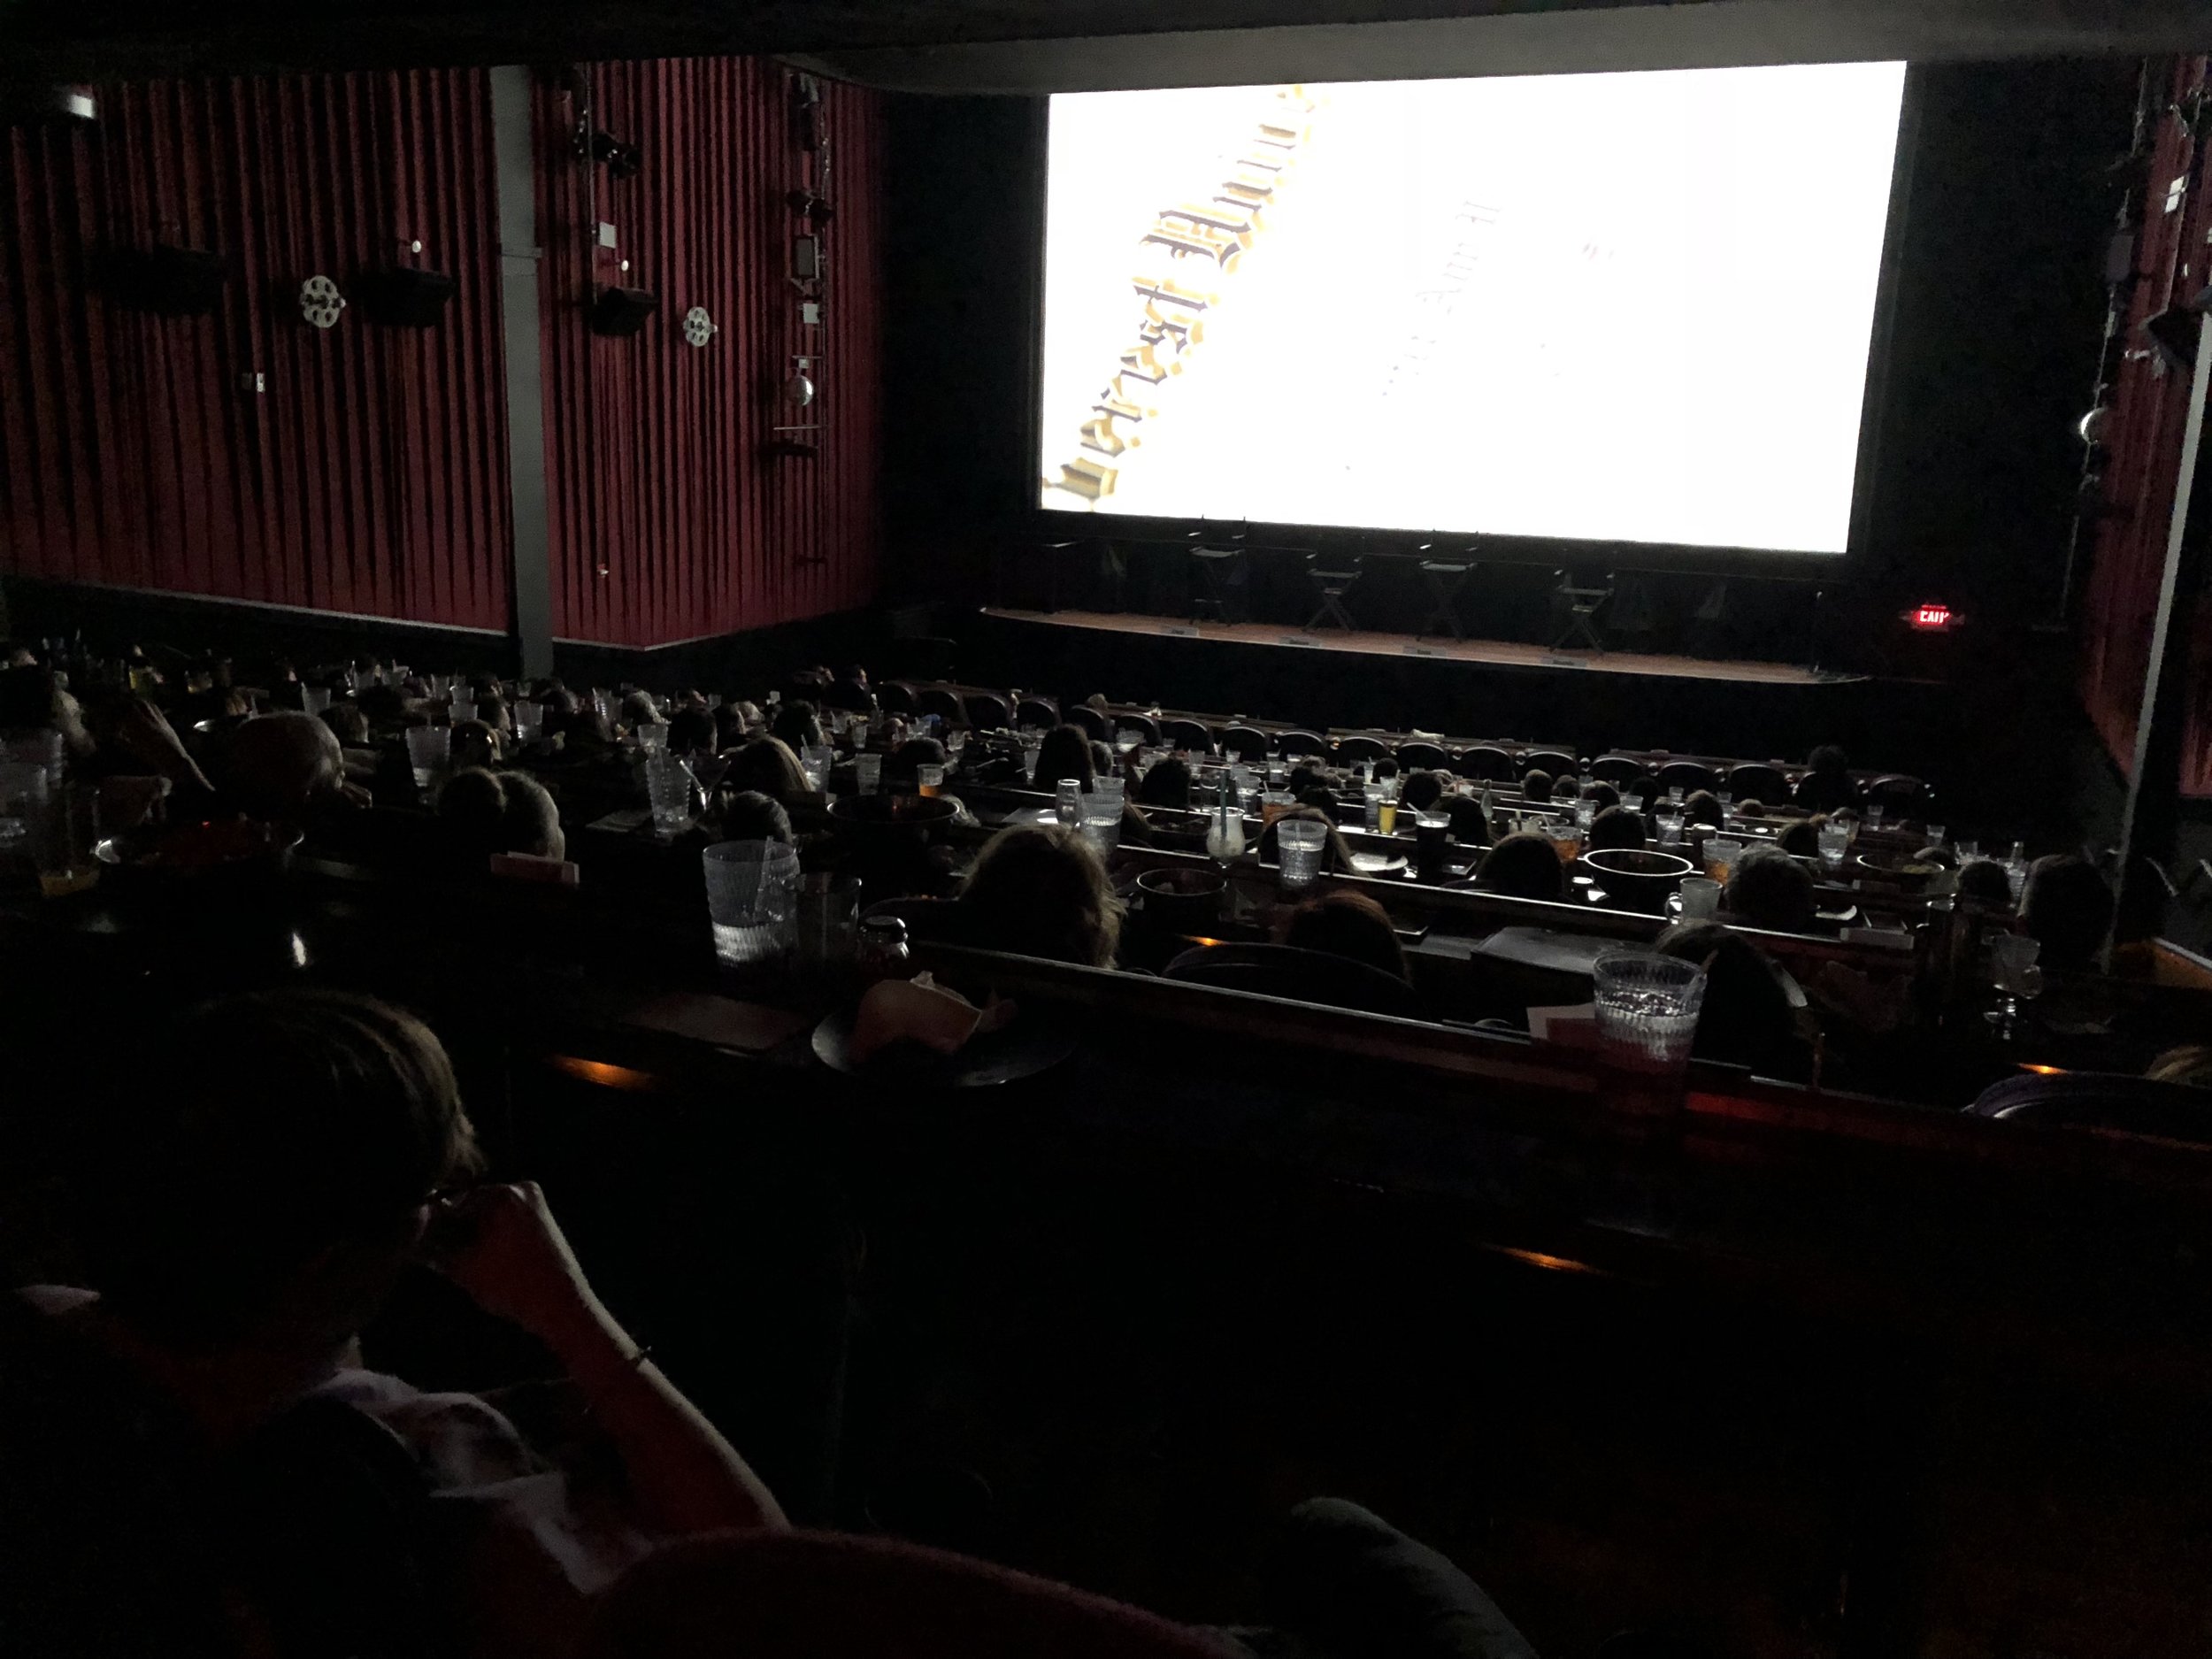 The audience watches the film.